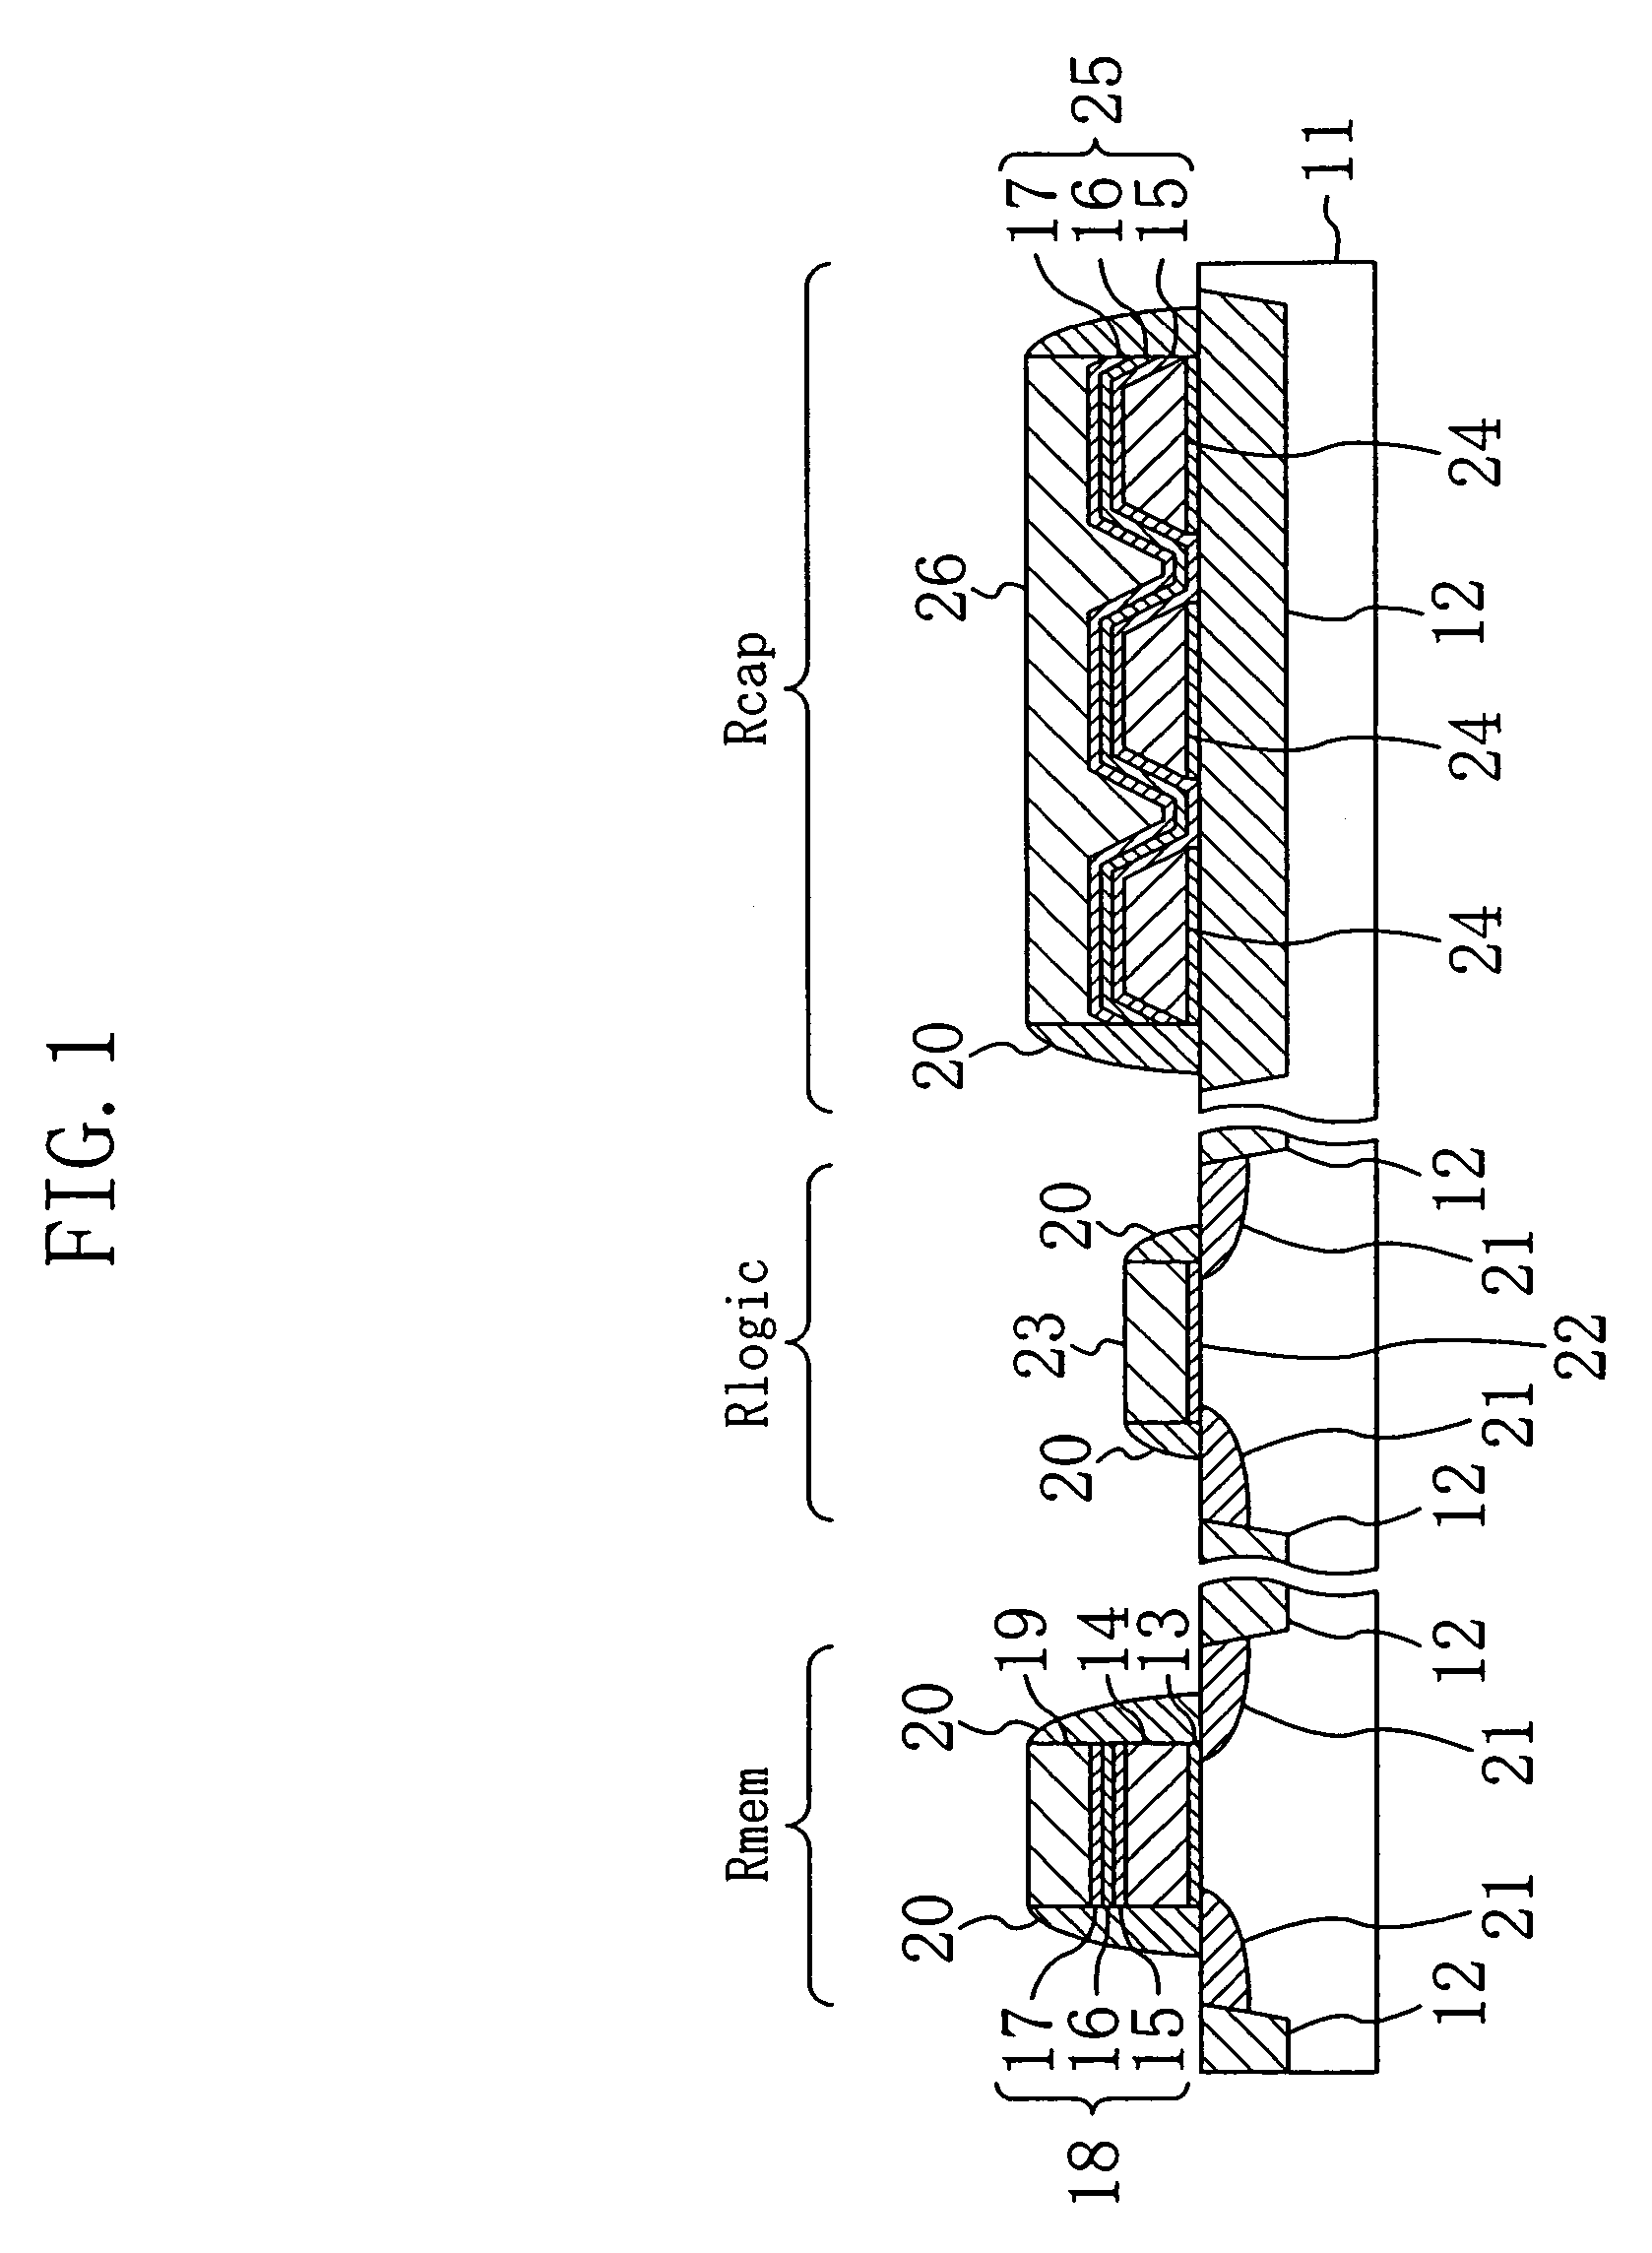 Non-volatile semiconductor memory device and manufacturing method thereof